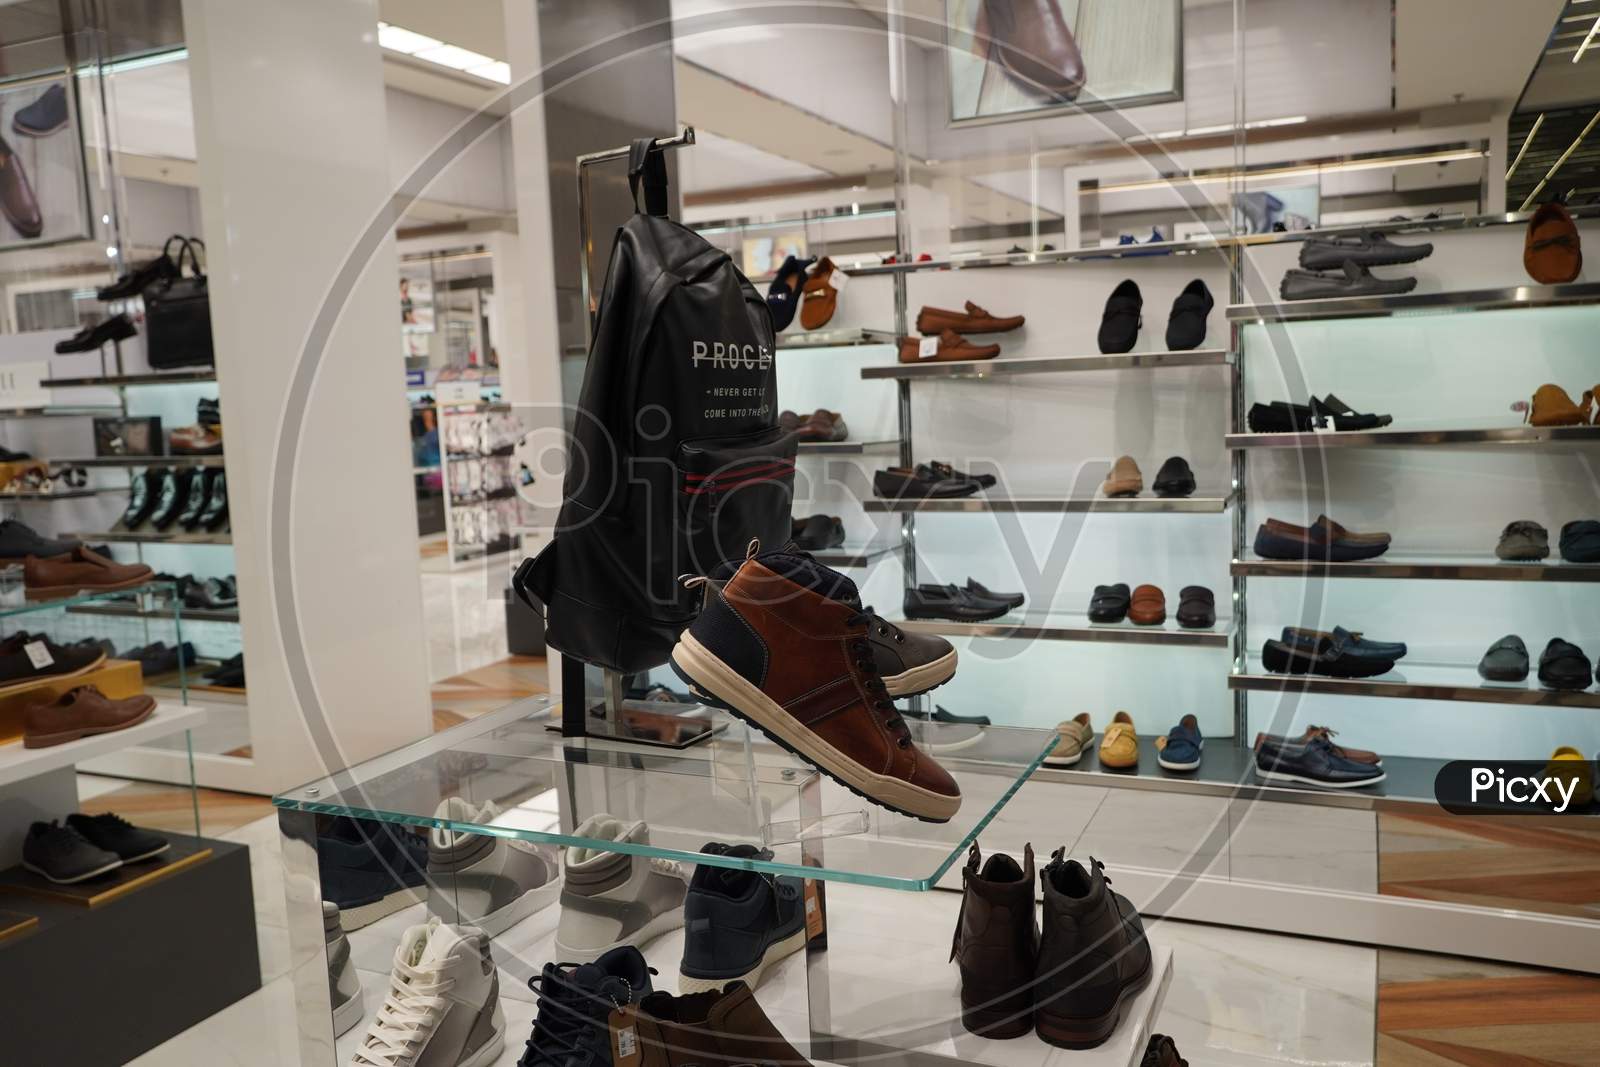 Dubai Uae December 2019 - Men Shoes In A Luxury Store. Set Of Black And Brown Mens Luxury Shoes Bags In The Store. Mens Footwear. Men Elegant Shoes In A Store.